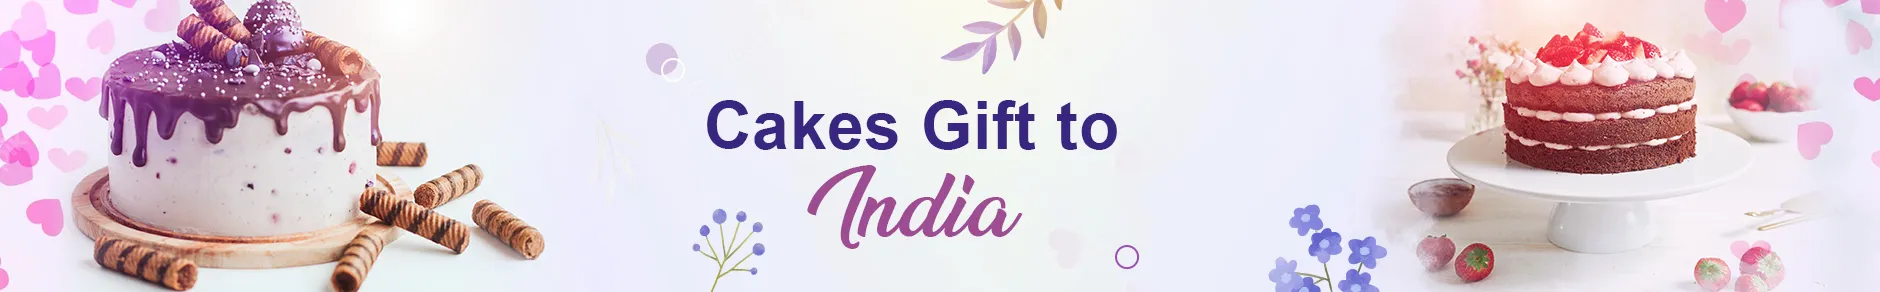 Cakes - Online Delivery of Cakes in India